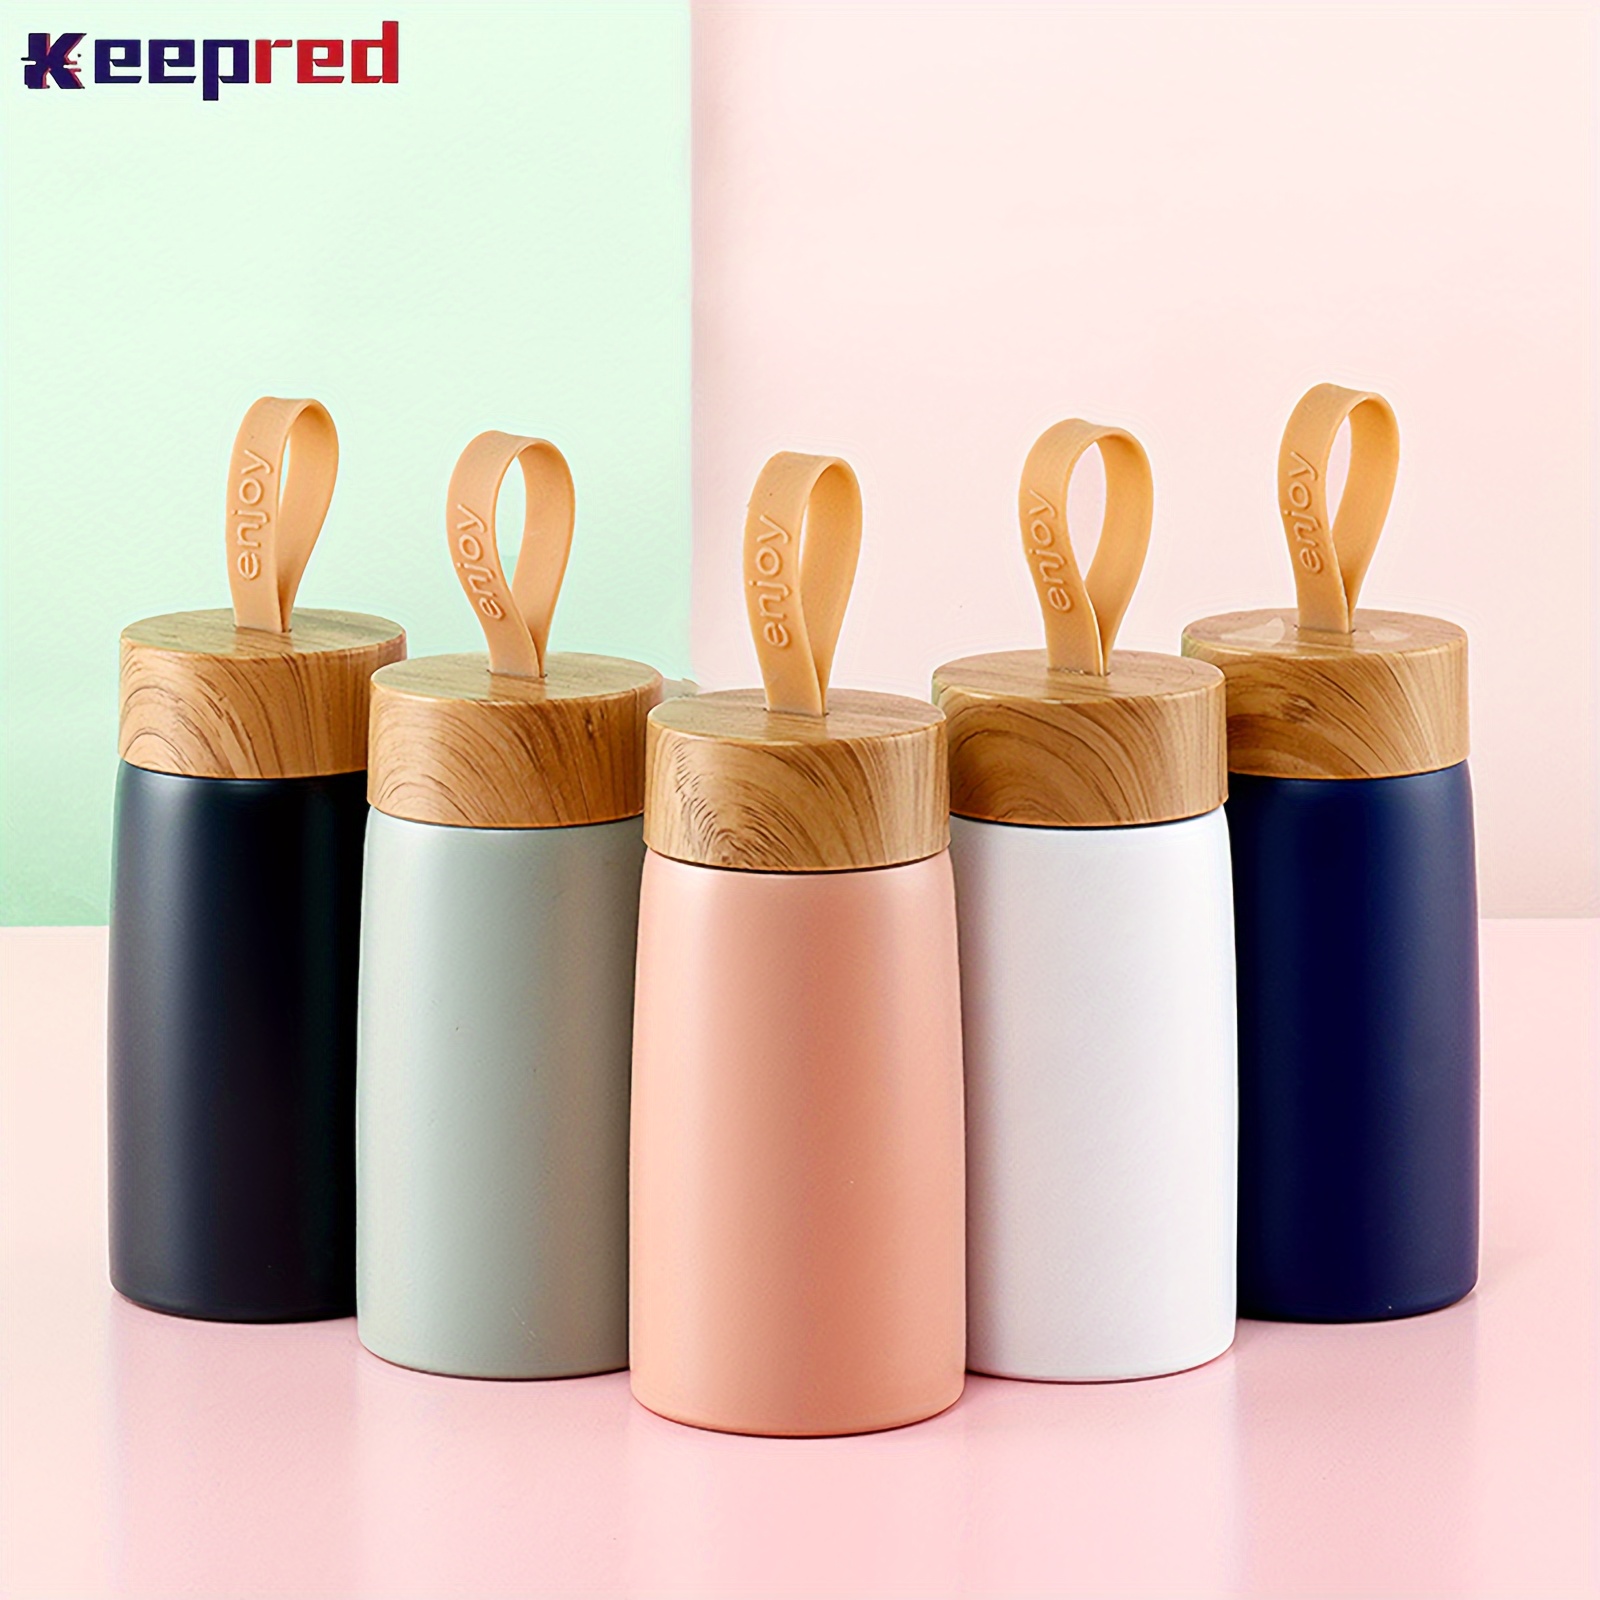 Keepred V2 Stainless Steel Leakproof Tumbler Insulation Cup With